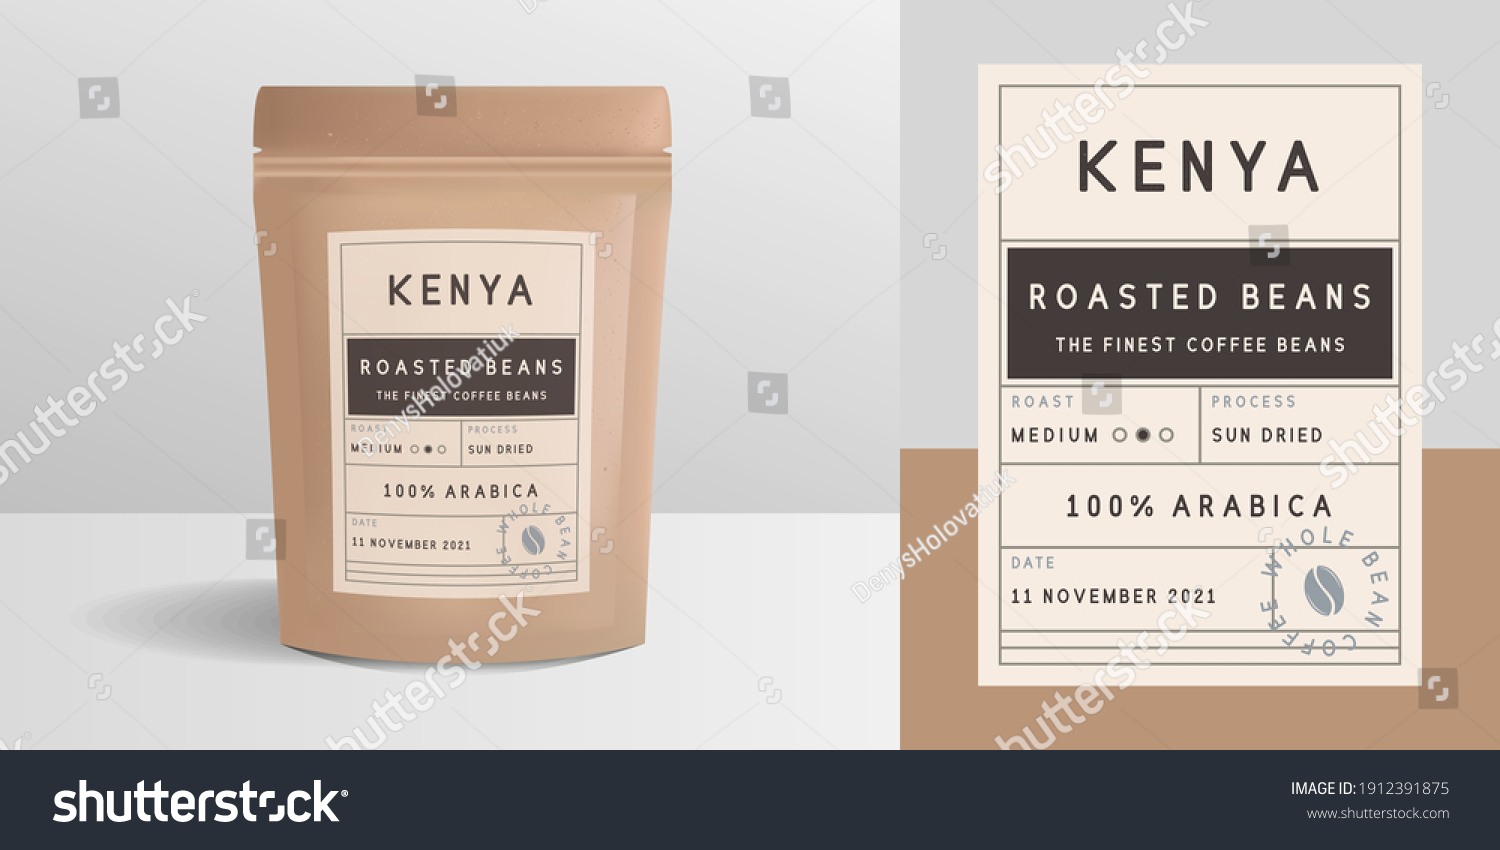 Paper zip package, pouch mockup. Vintage trendy label, sticker template.
Coffee zip package design. Package mockup template for logo, brand, sticker, label. Vector illustration #1912391875